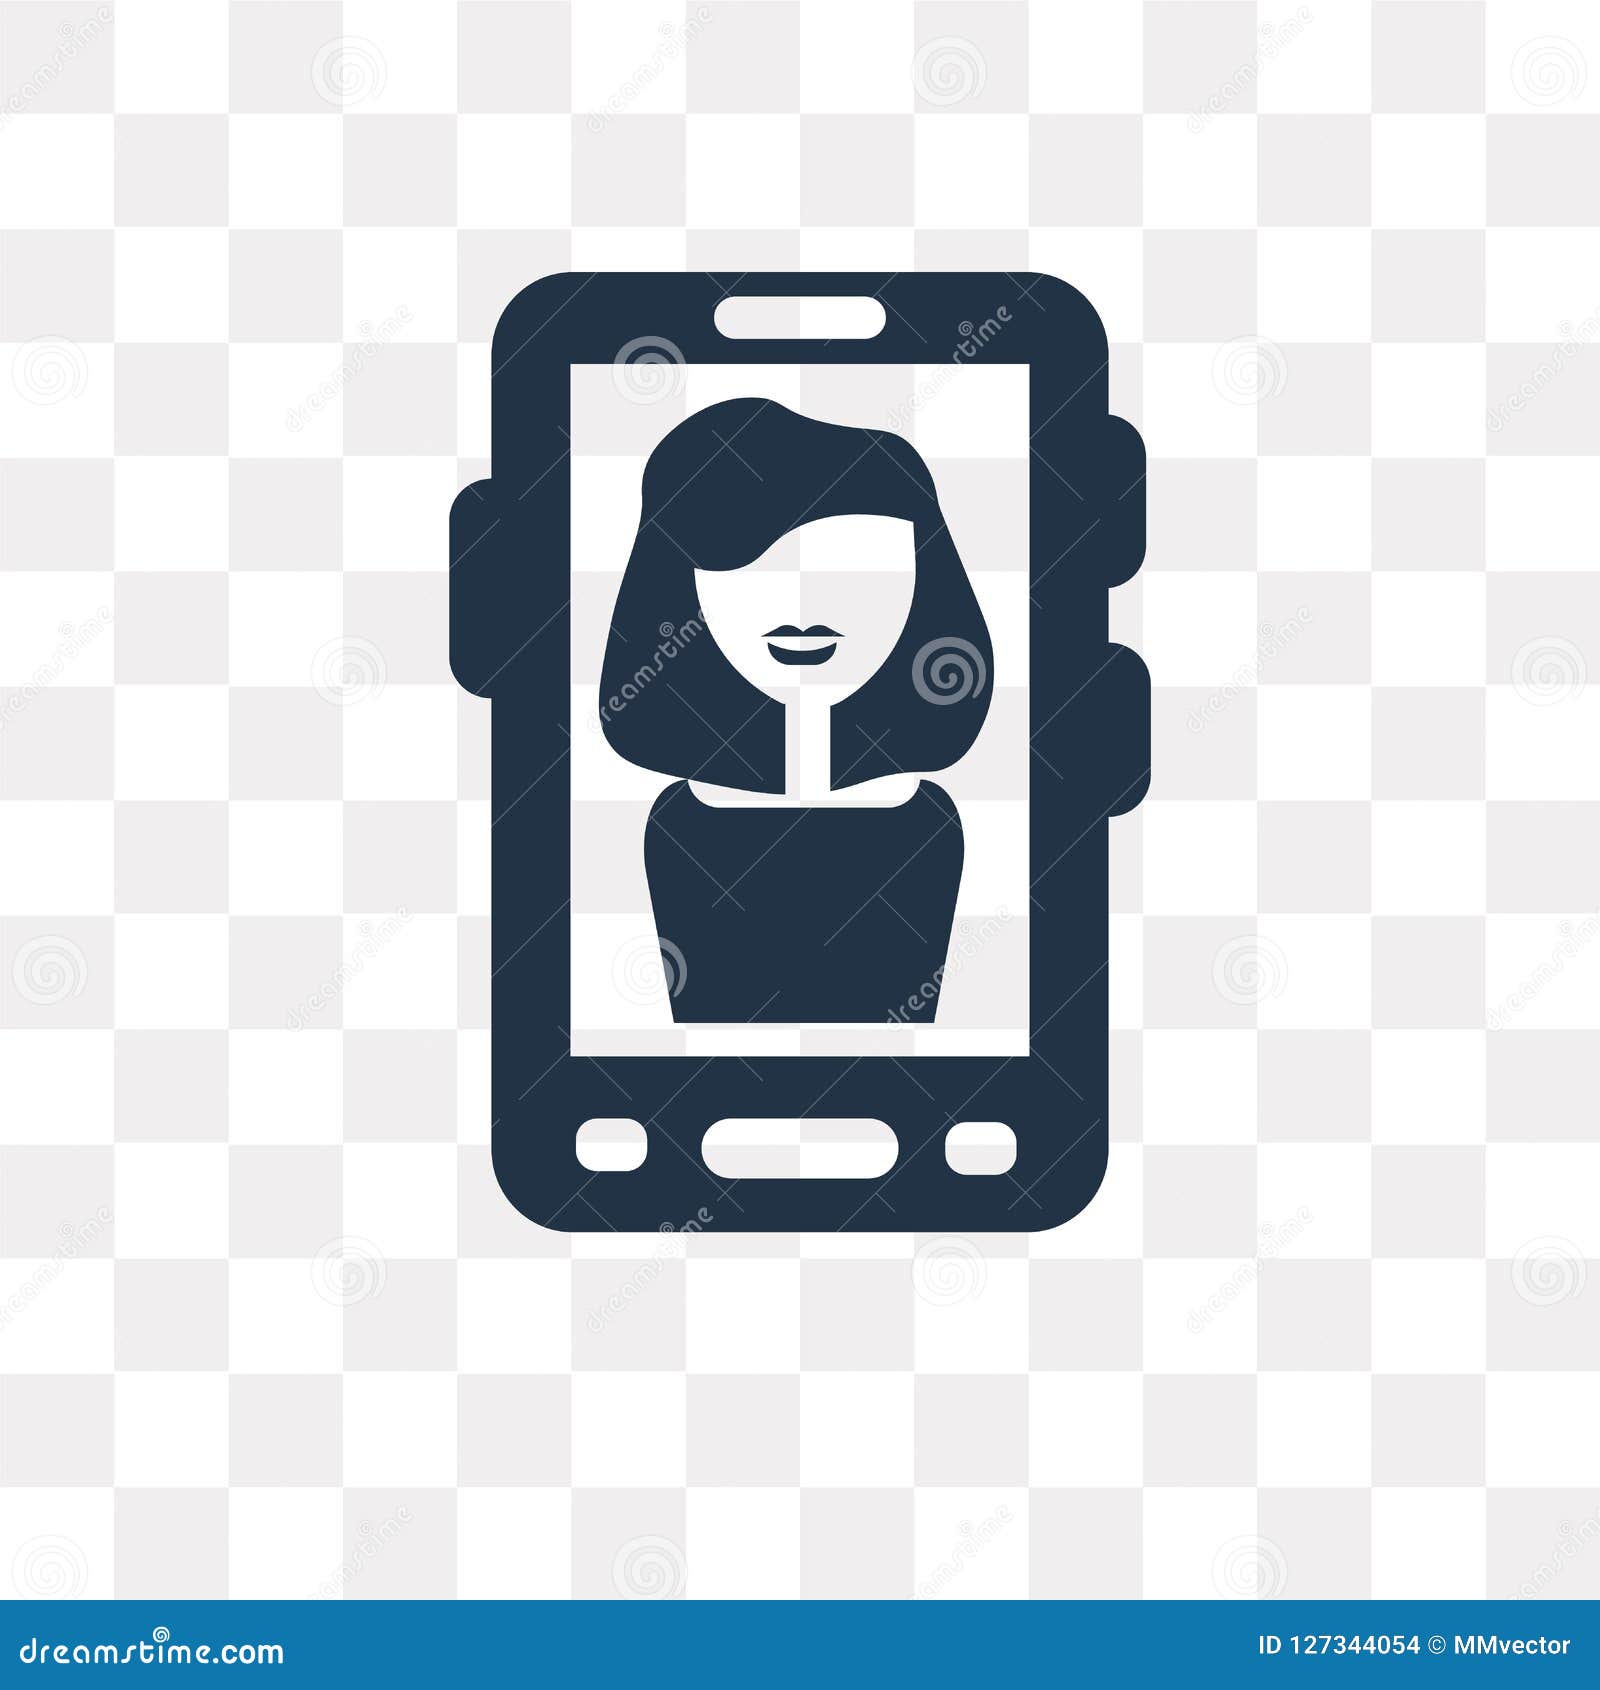 Video Call Vector Icon Isolated on Transparent Background, Video Stock